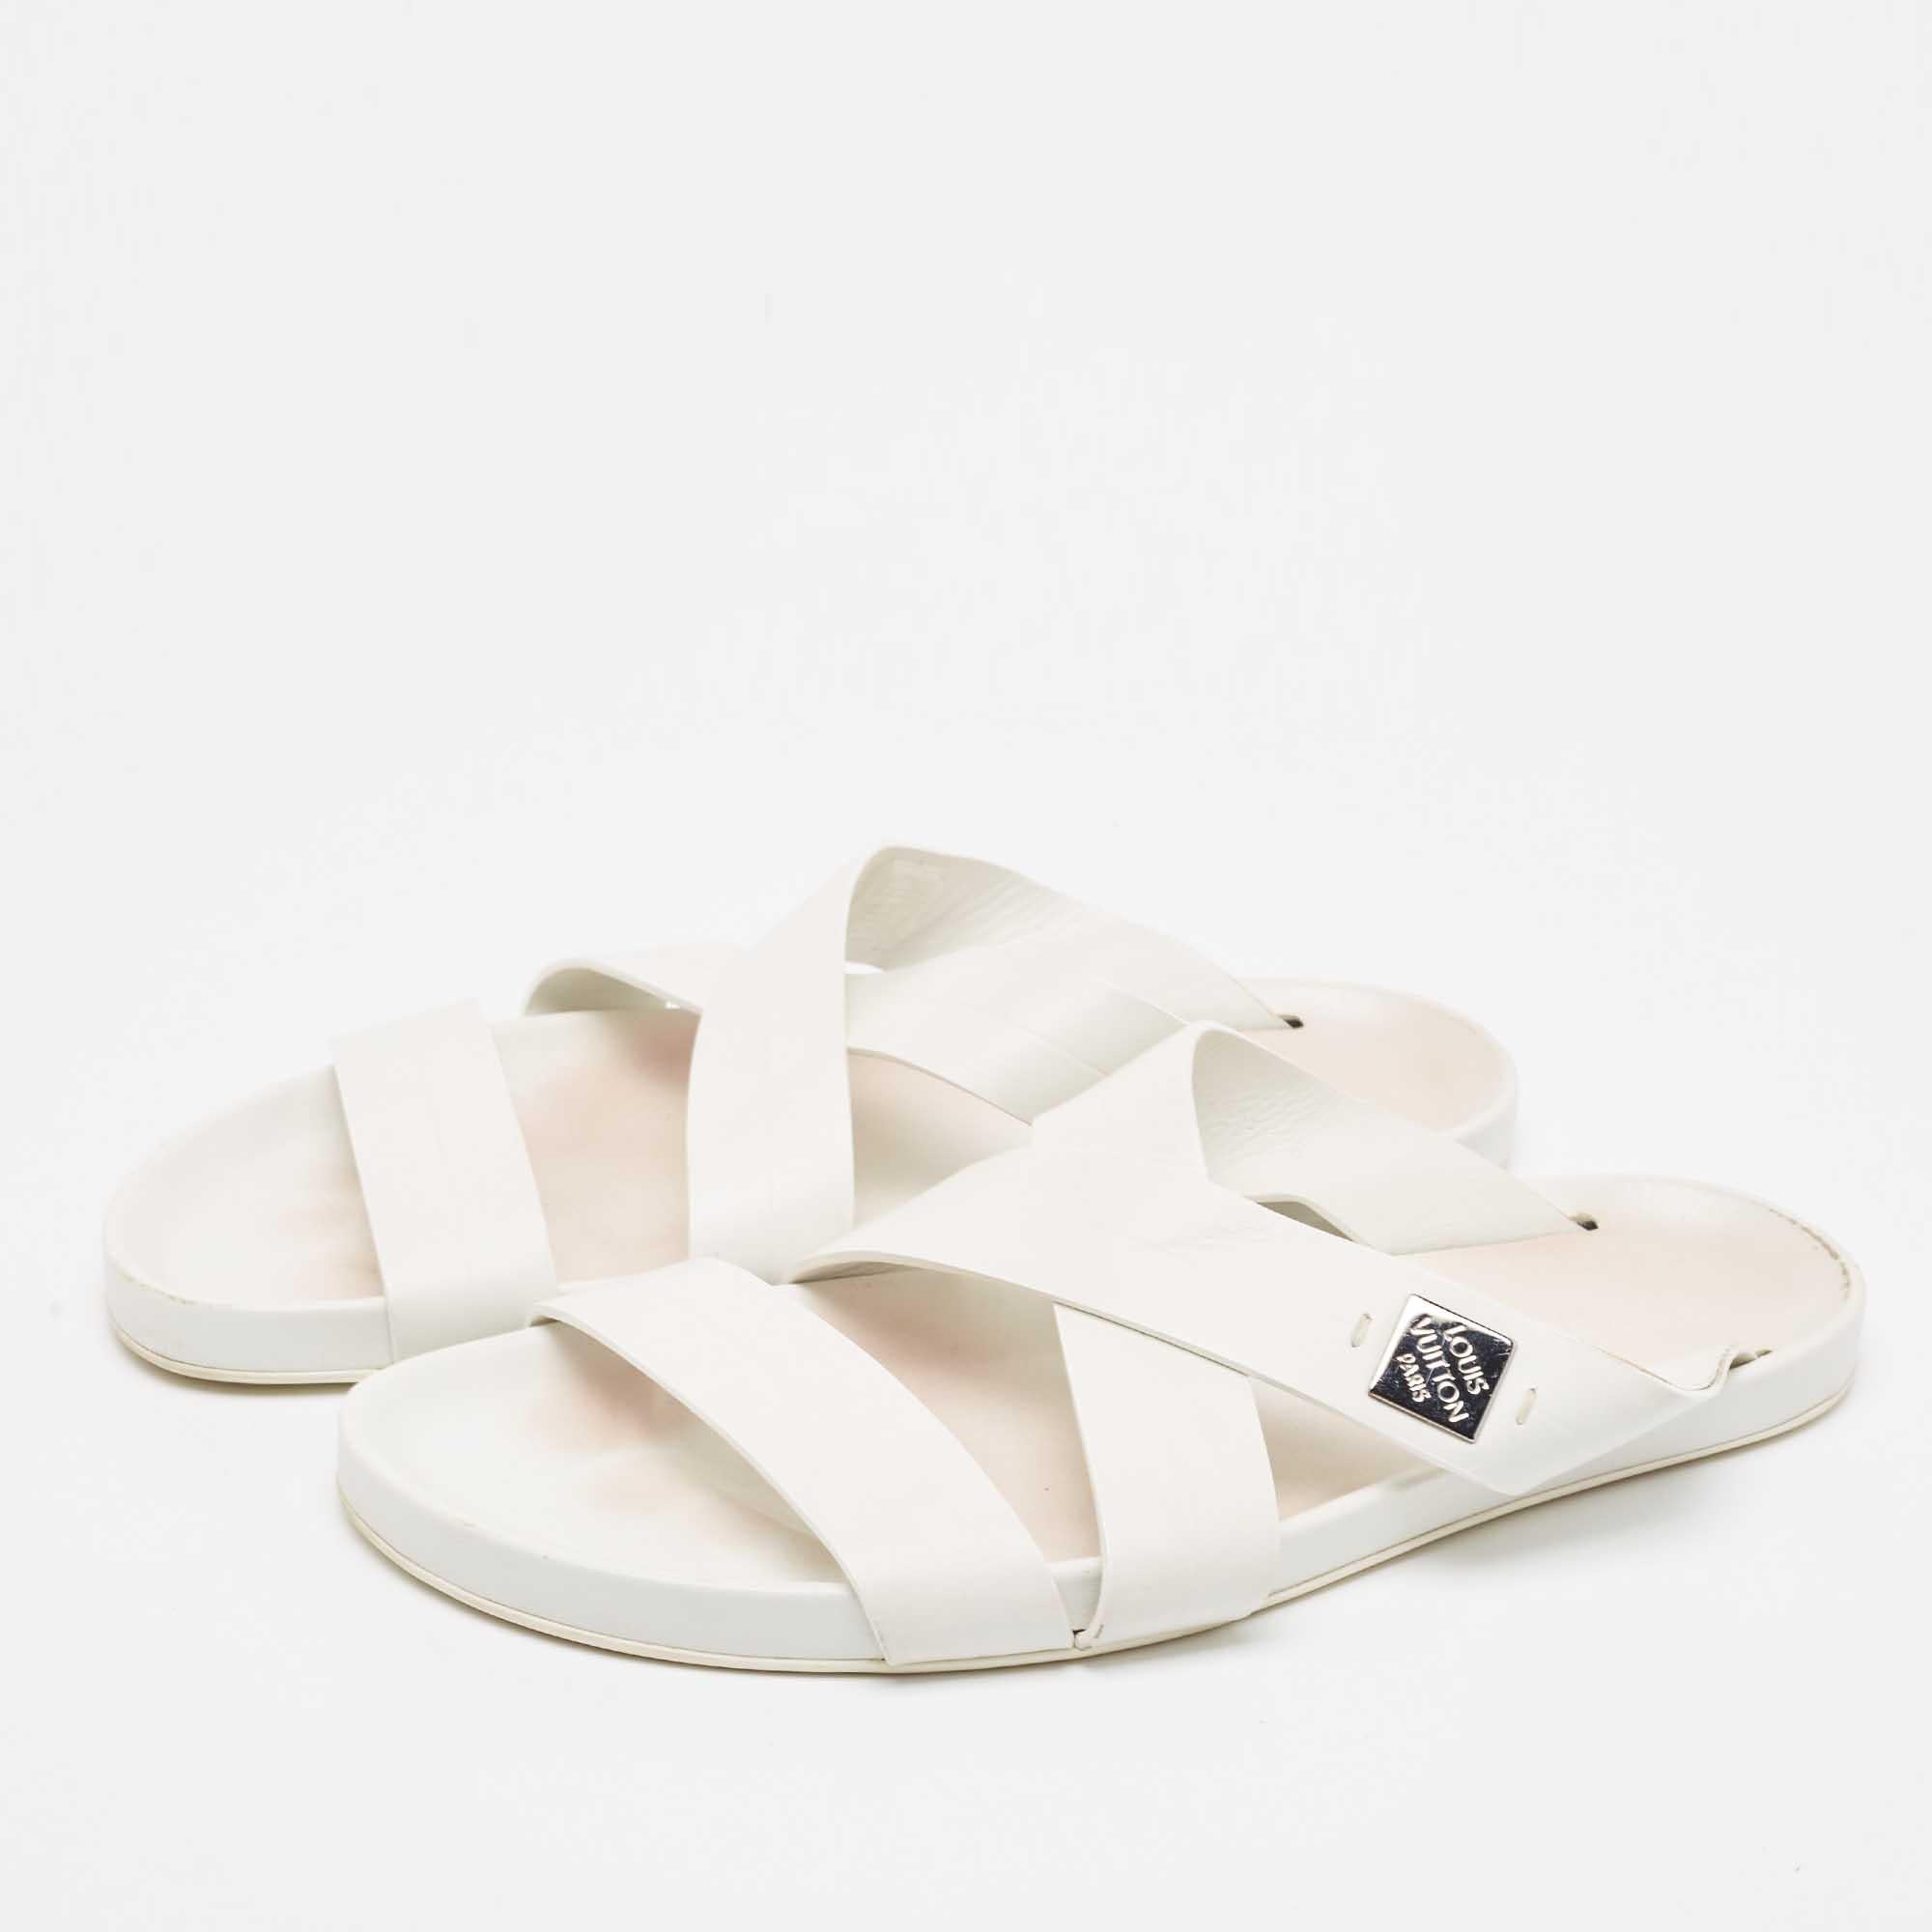 Keep your comfort to a maximum with these durable white leather flats. These Louis Vuitton slides are perfect for everyday use.

